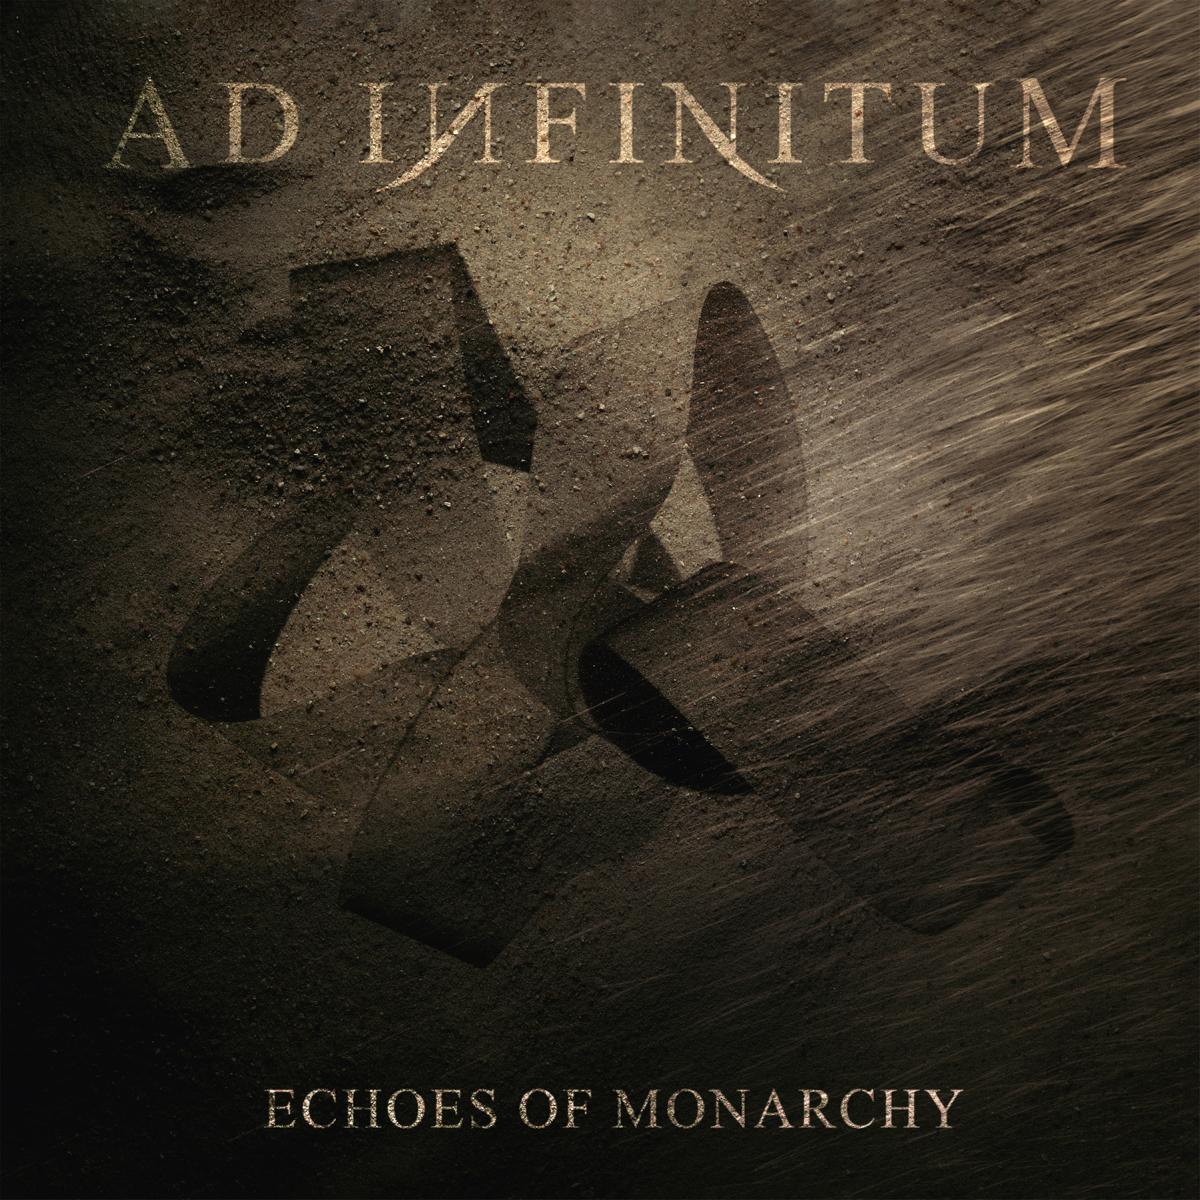 Ad infinitum echoes of monarchy